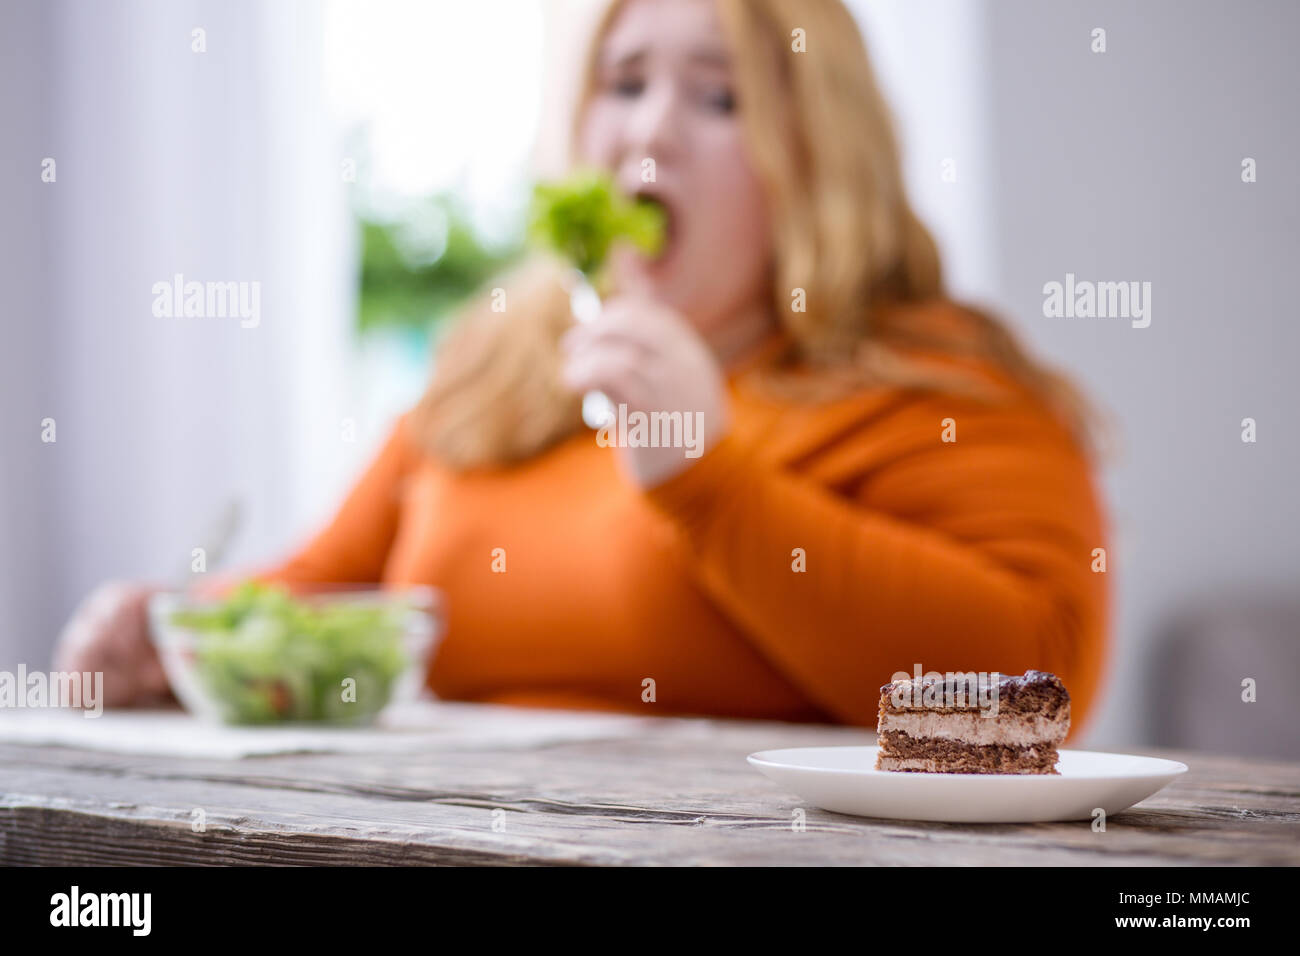 Desolate plump woman looking at cookies Stock Photo